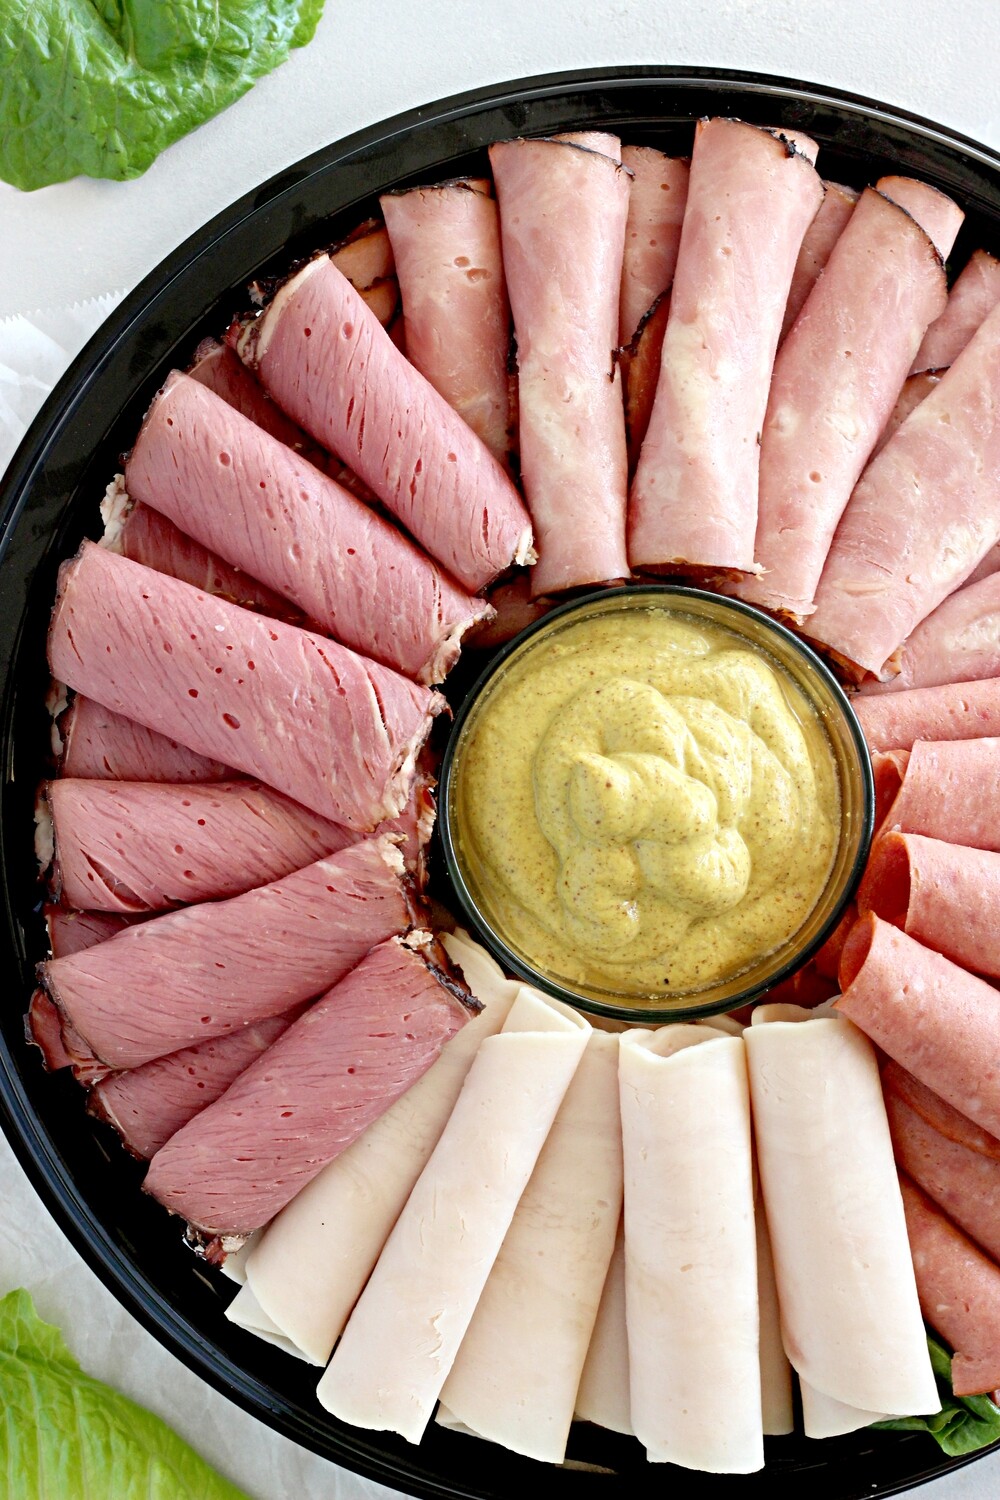 Build-Your-Own Cold Cuts Package